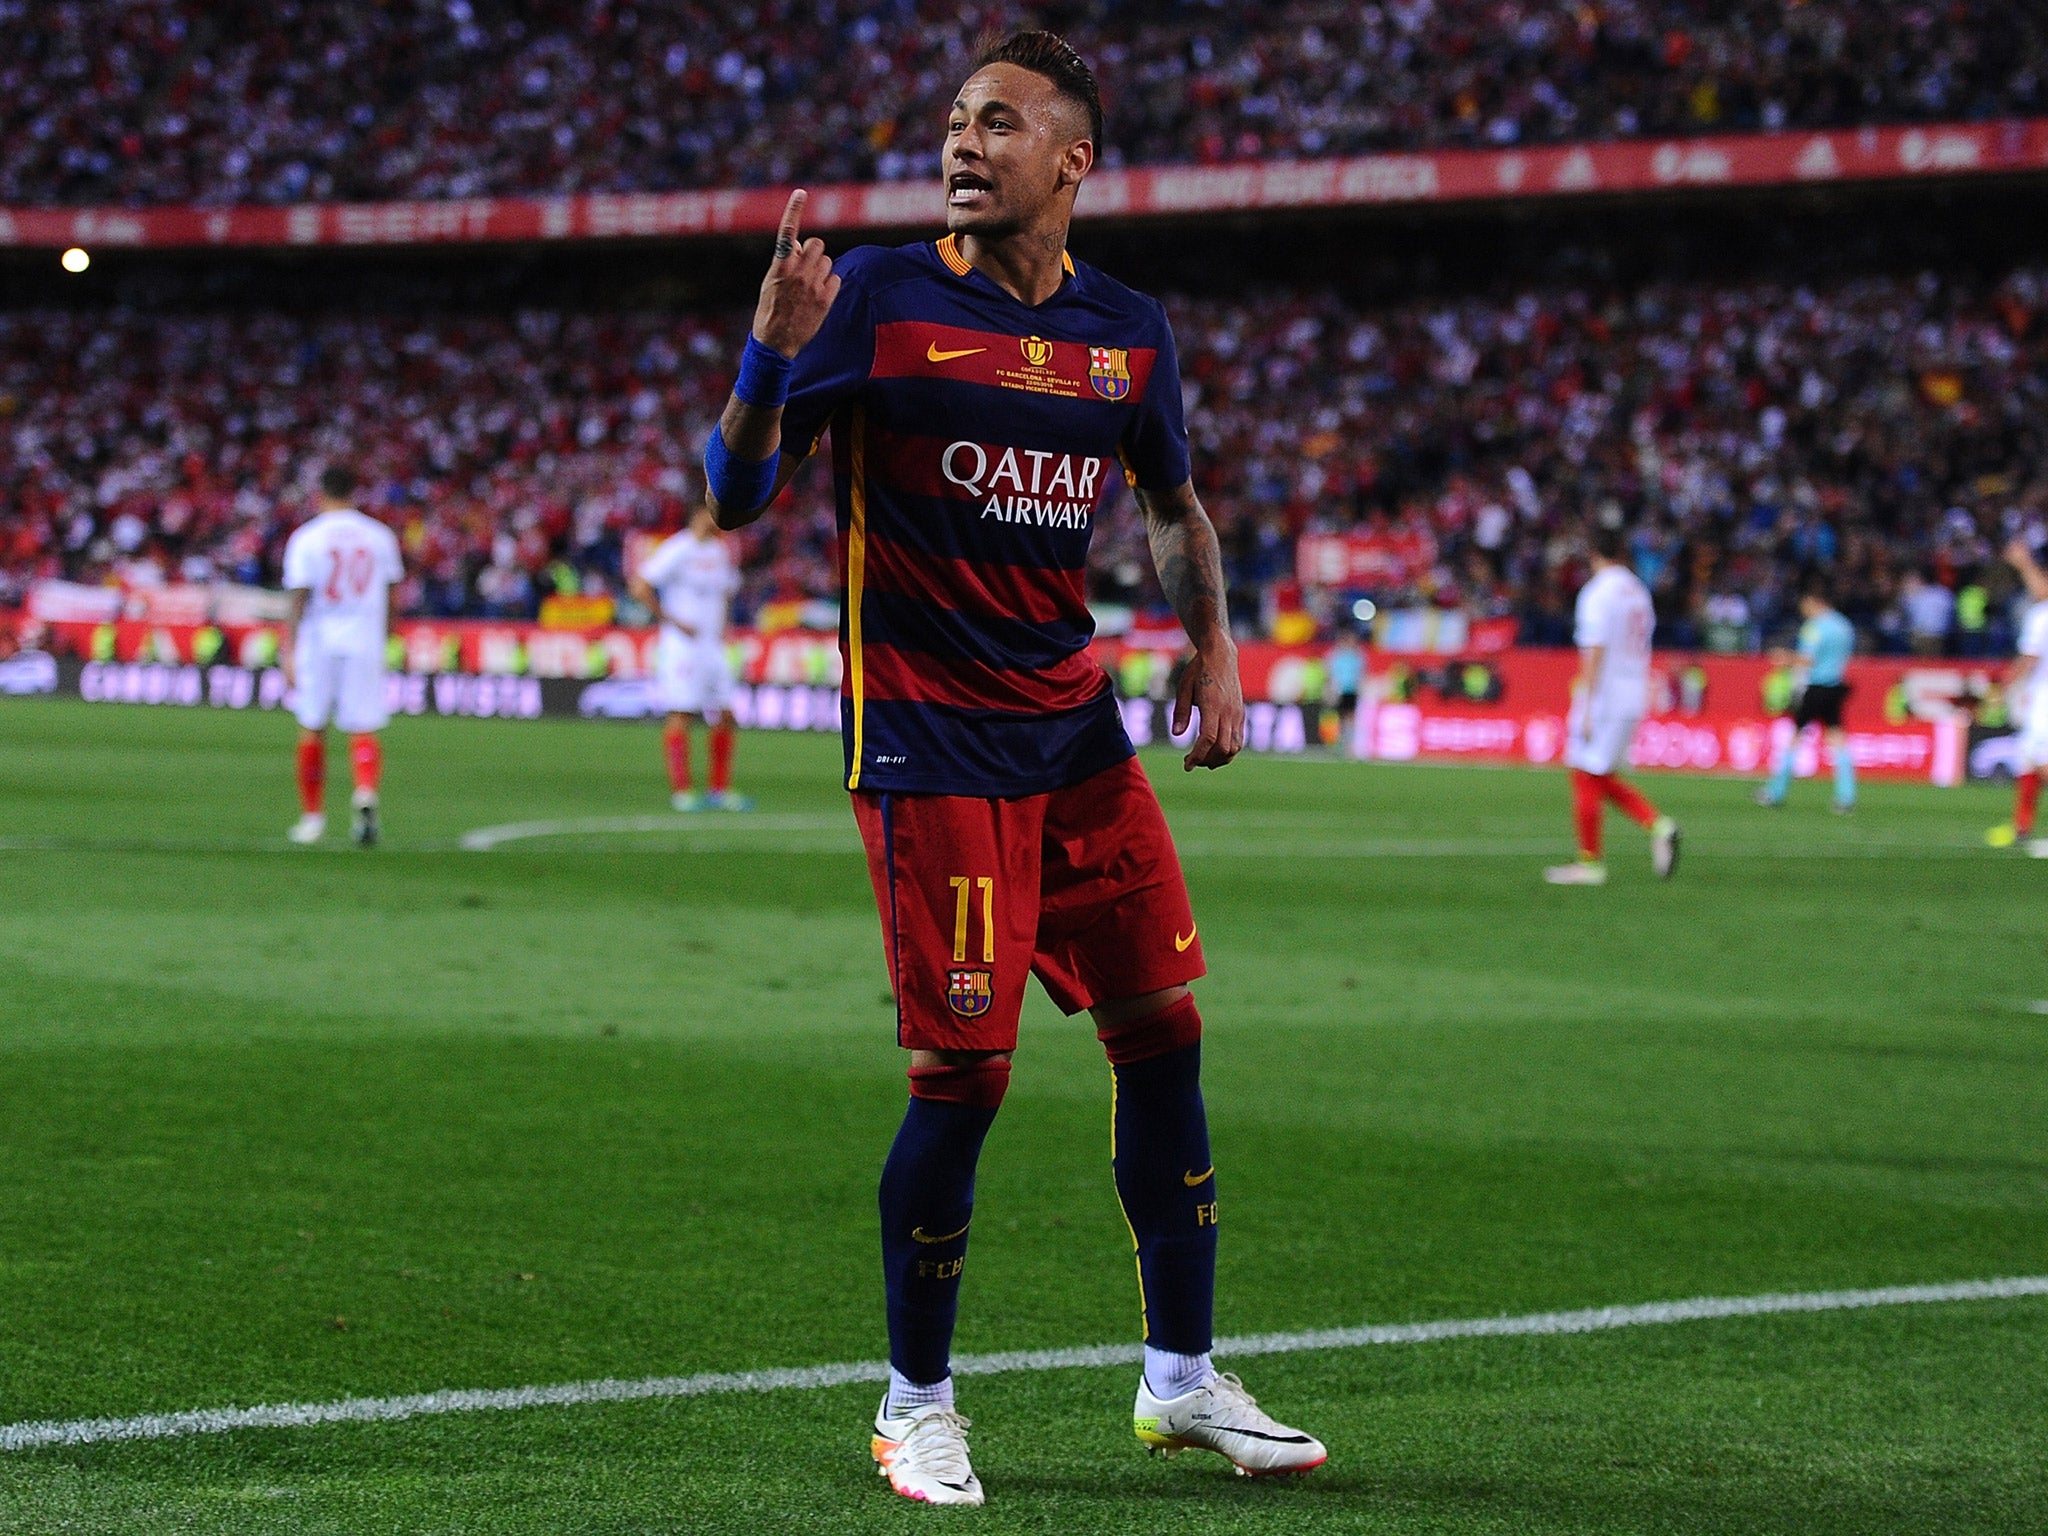 Barcelona will pay a £4.3m fine to settle the Neymar tax fraud case